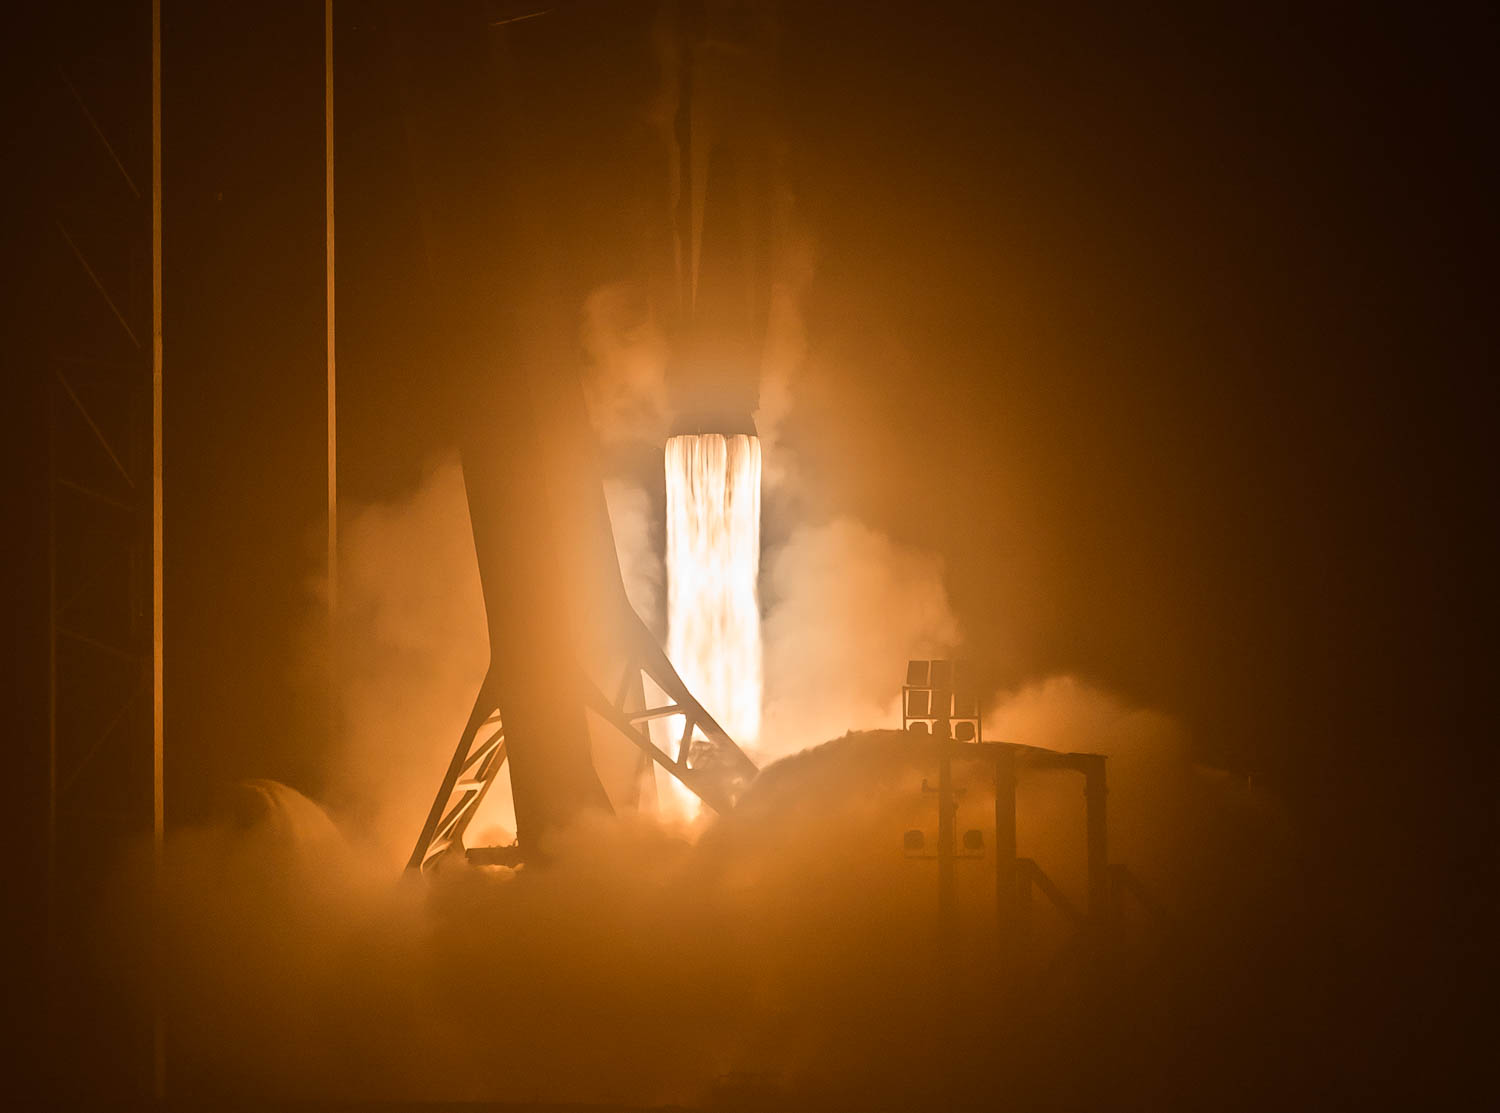  March 2 - 2019. A close up look of SpaceX’s Falcon 9 rocket lifting off from Launch Pad 39 at the Kennedy Space Center in Florida, delivering the first Crew Dragon capsule to the International Space Station on its DM-1 Mission. 